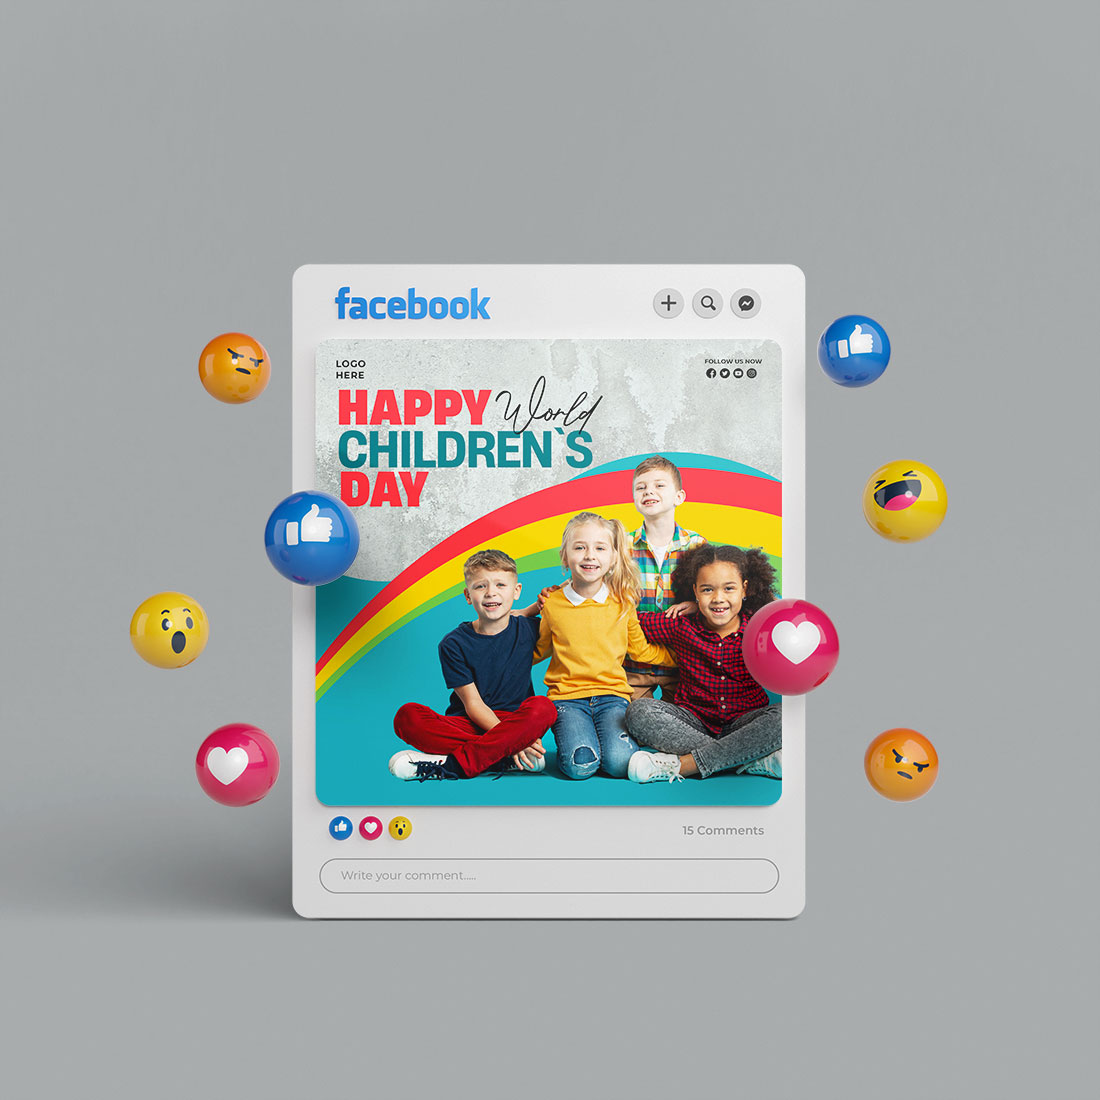 Happy world children's day with a rainbow social media post banner PSD preview image.